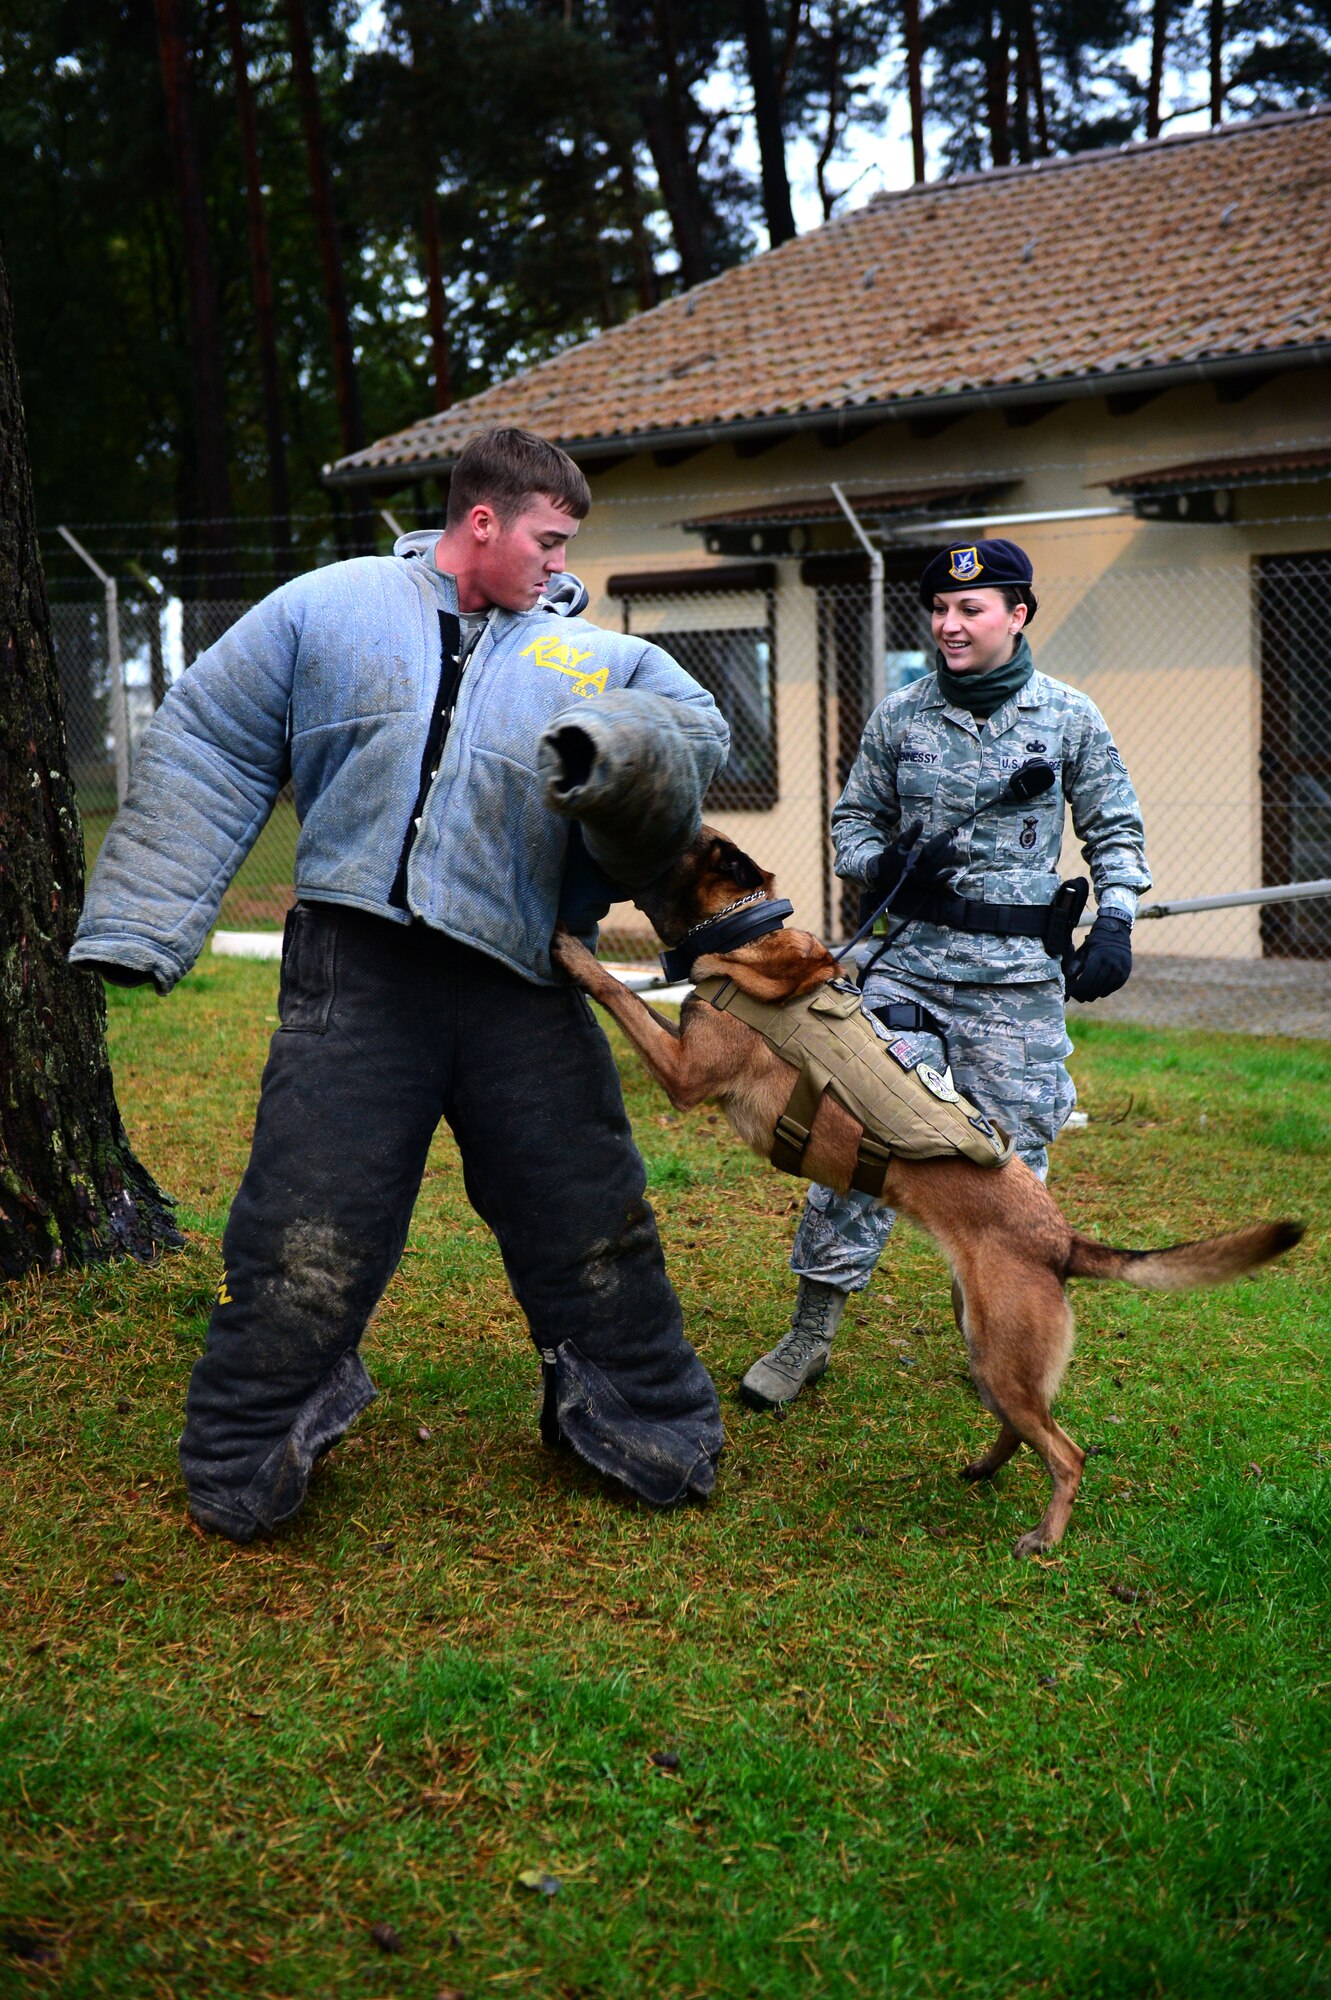 SPANGDAHLEM AIR BASE, Germany – U.S. Air Force Staff Sgt. Shannon Hennessy, 52nd Security Forces Squadron military working dog handler from Colusa, Calif., and her dog Katya, demonstrate K-9 unit capabilities on Senior Airman Gilbert Lundgren, military working dog handler from Kenosha, Wis., Oct. 15, 2012, at a K-9 unit demonstration.  German Shepherds and Belgian Malinois are the breed of dogs that make up the 52nd SFS military working dog unit. (U.S. Air Force photo by Airman 1st Class Gustavo Castillo/Released)